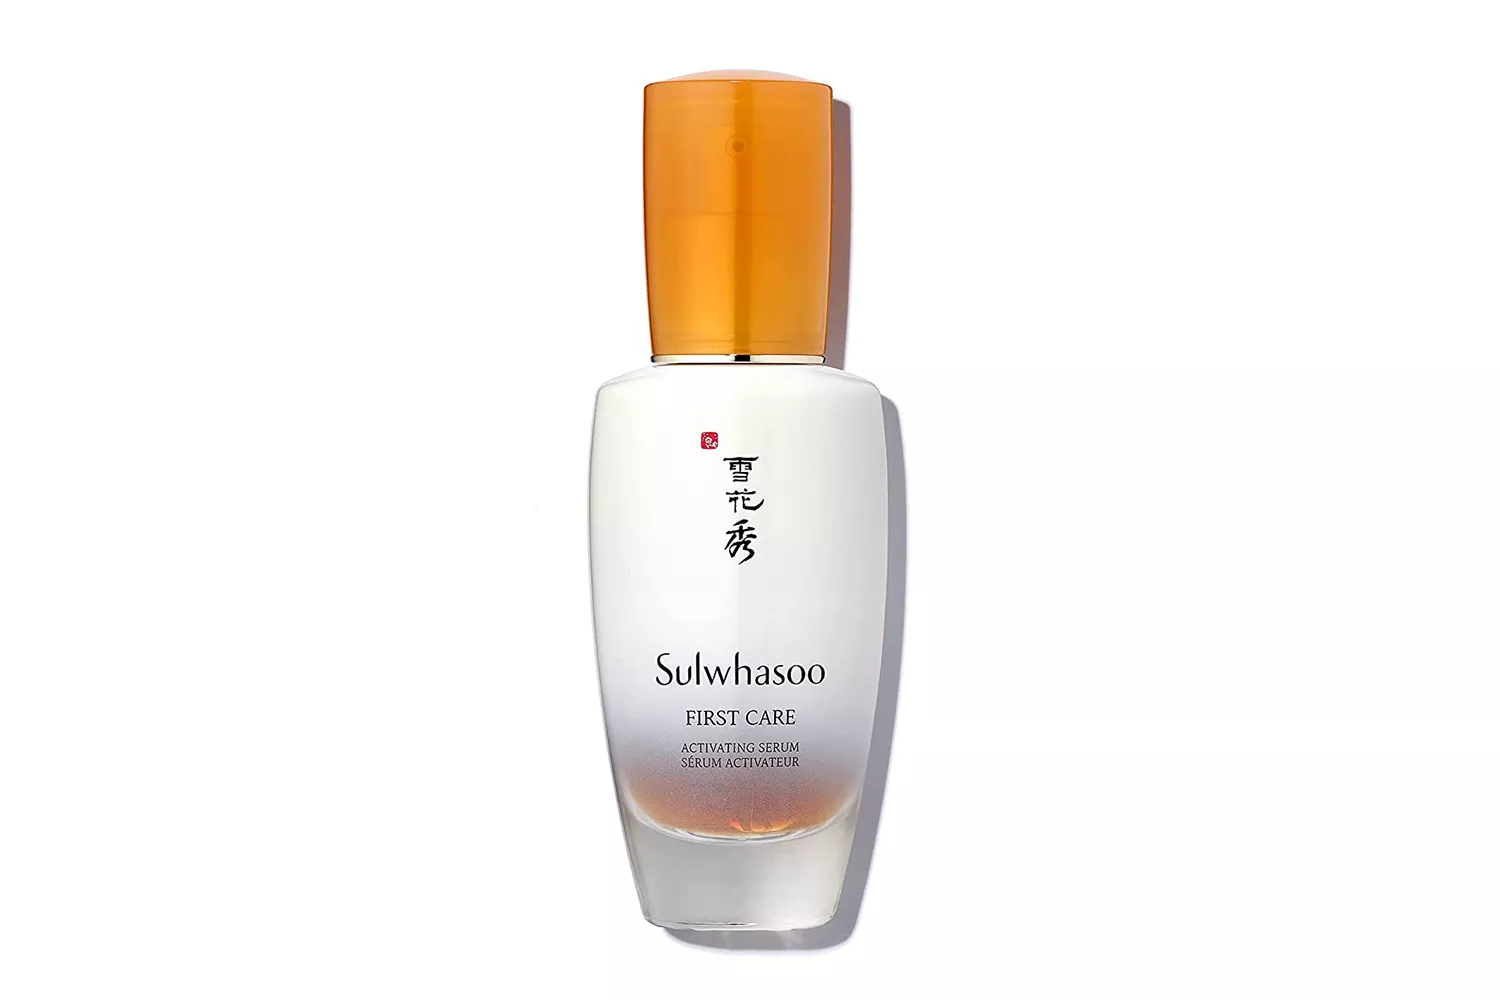 Amazon Prime Day Sulwhasoo First Care Activating Serum